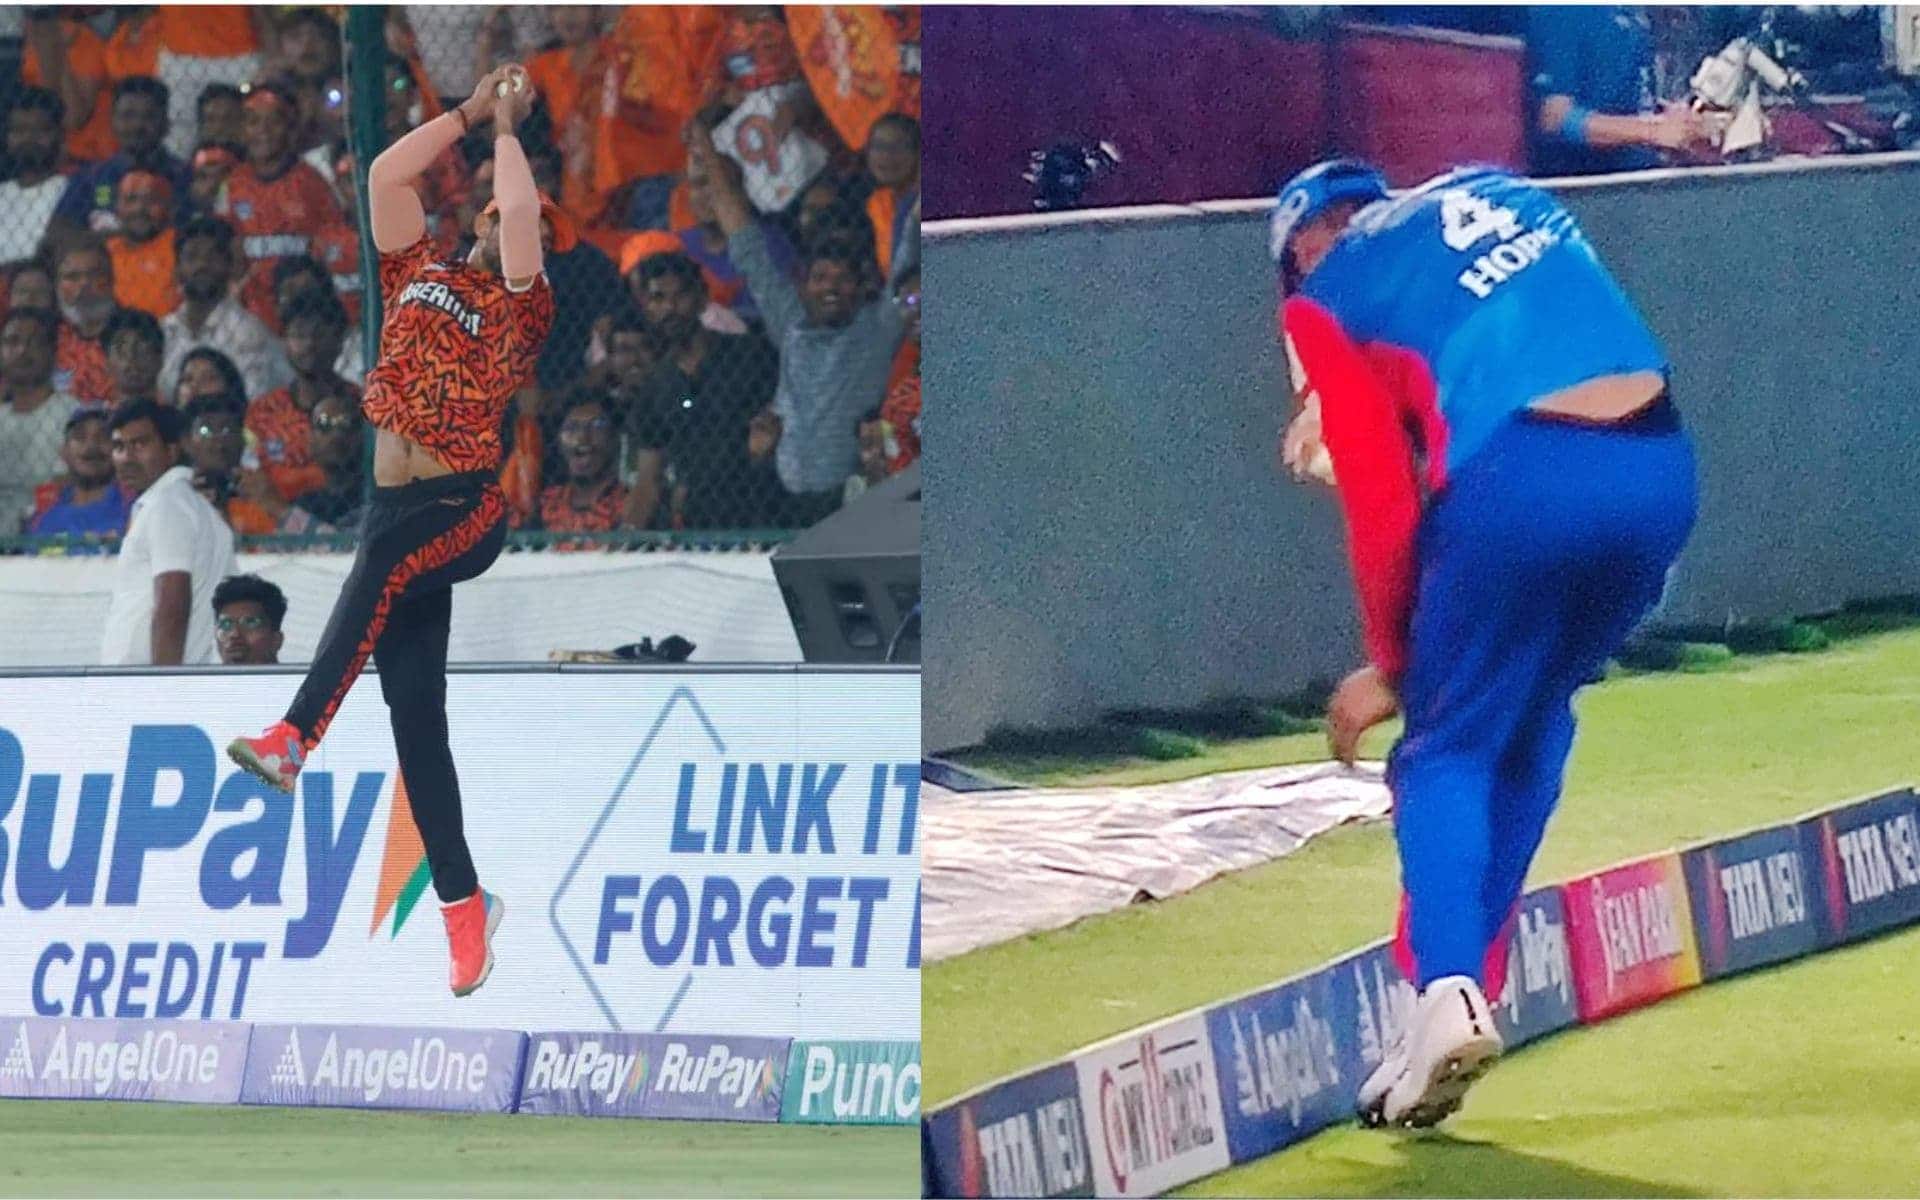 Nitish Reddy and Shai Hope during their respective catches (X.com)